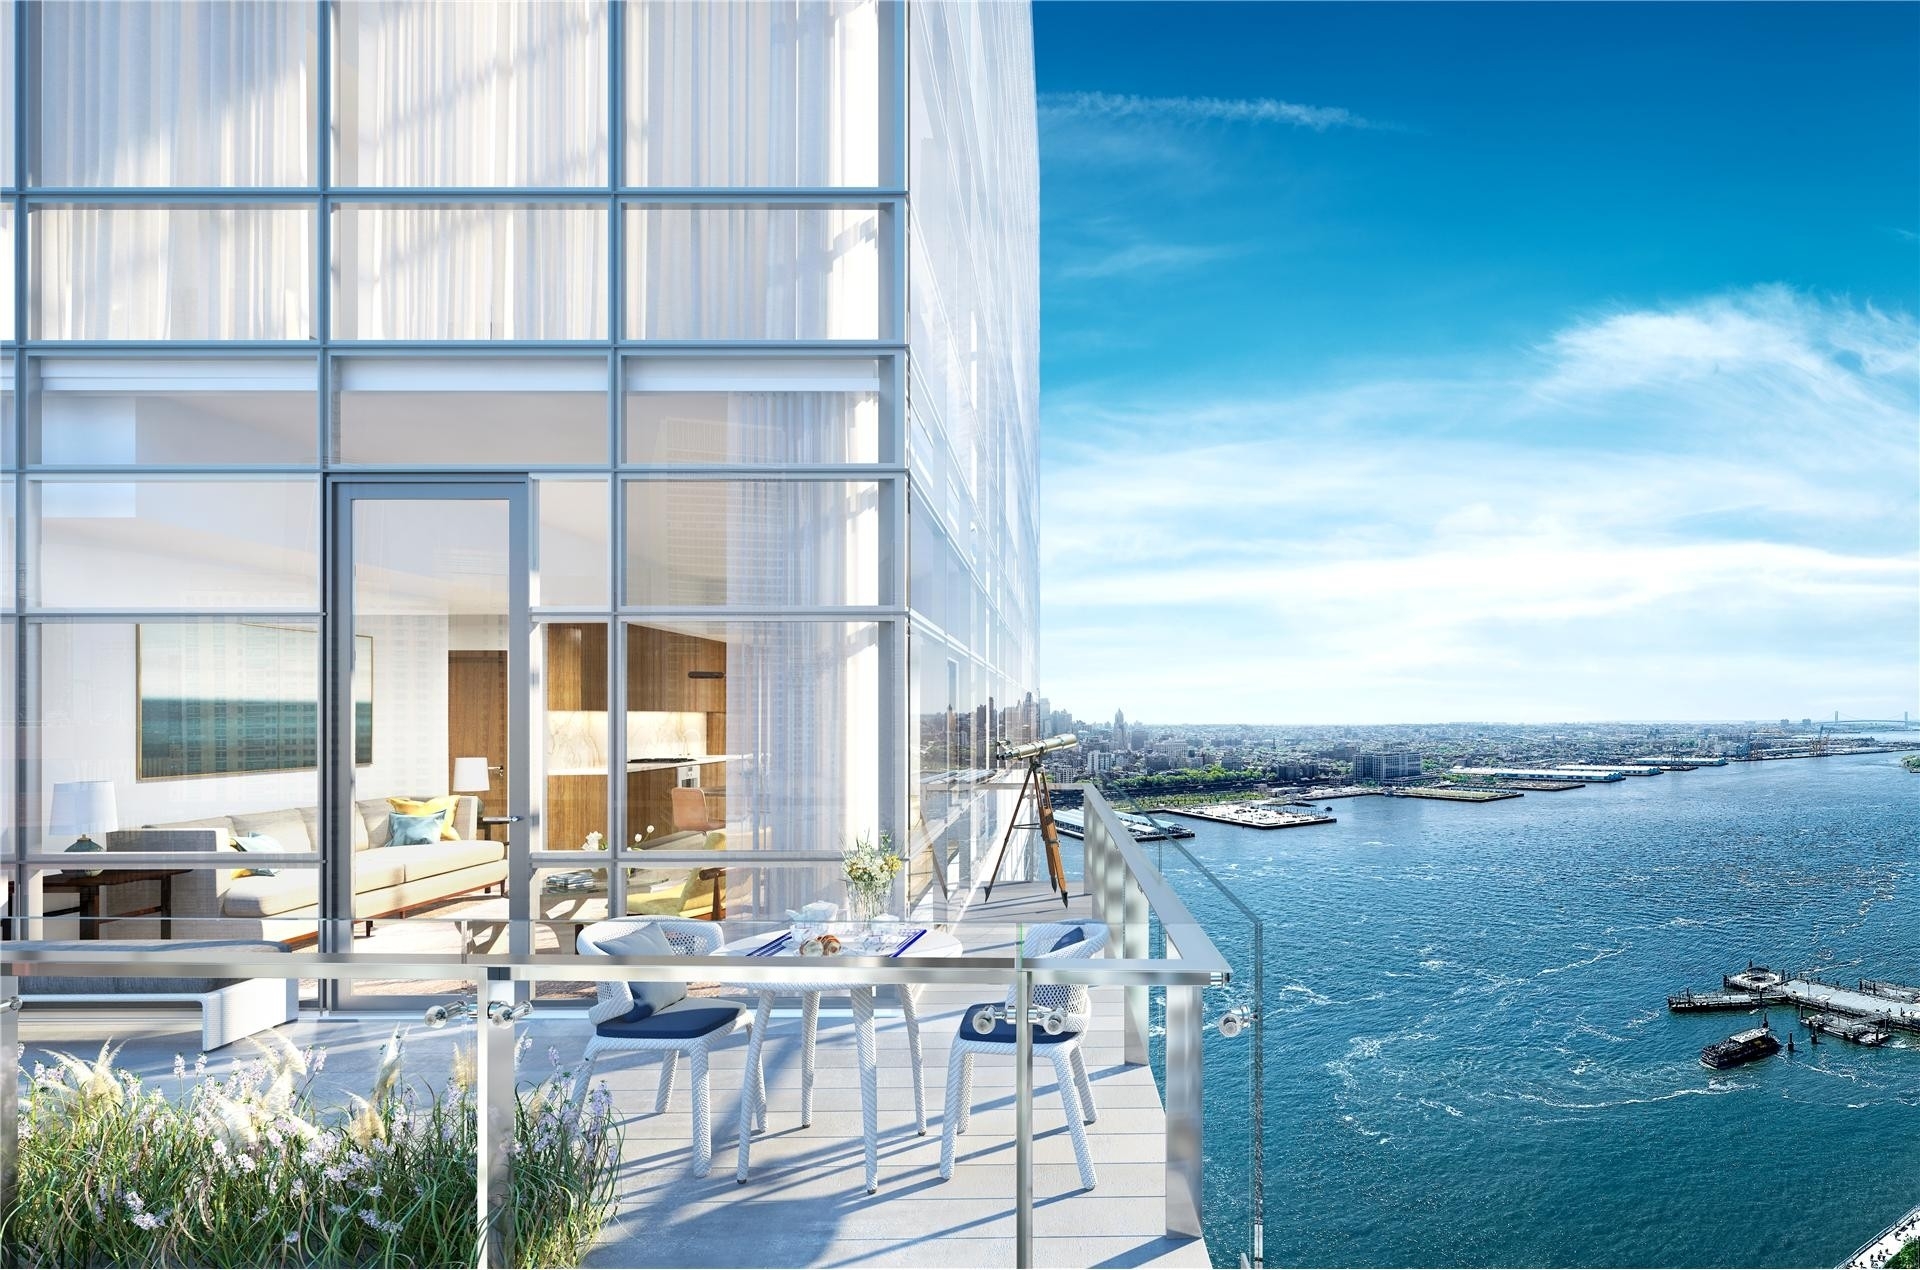 Condominium for Sale at Seaport Residences, 161 MAIDEN LN, 33A South Street Seaport, New York, NY 10038